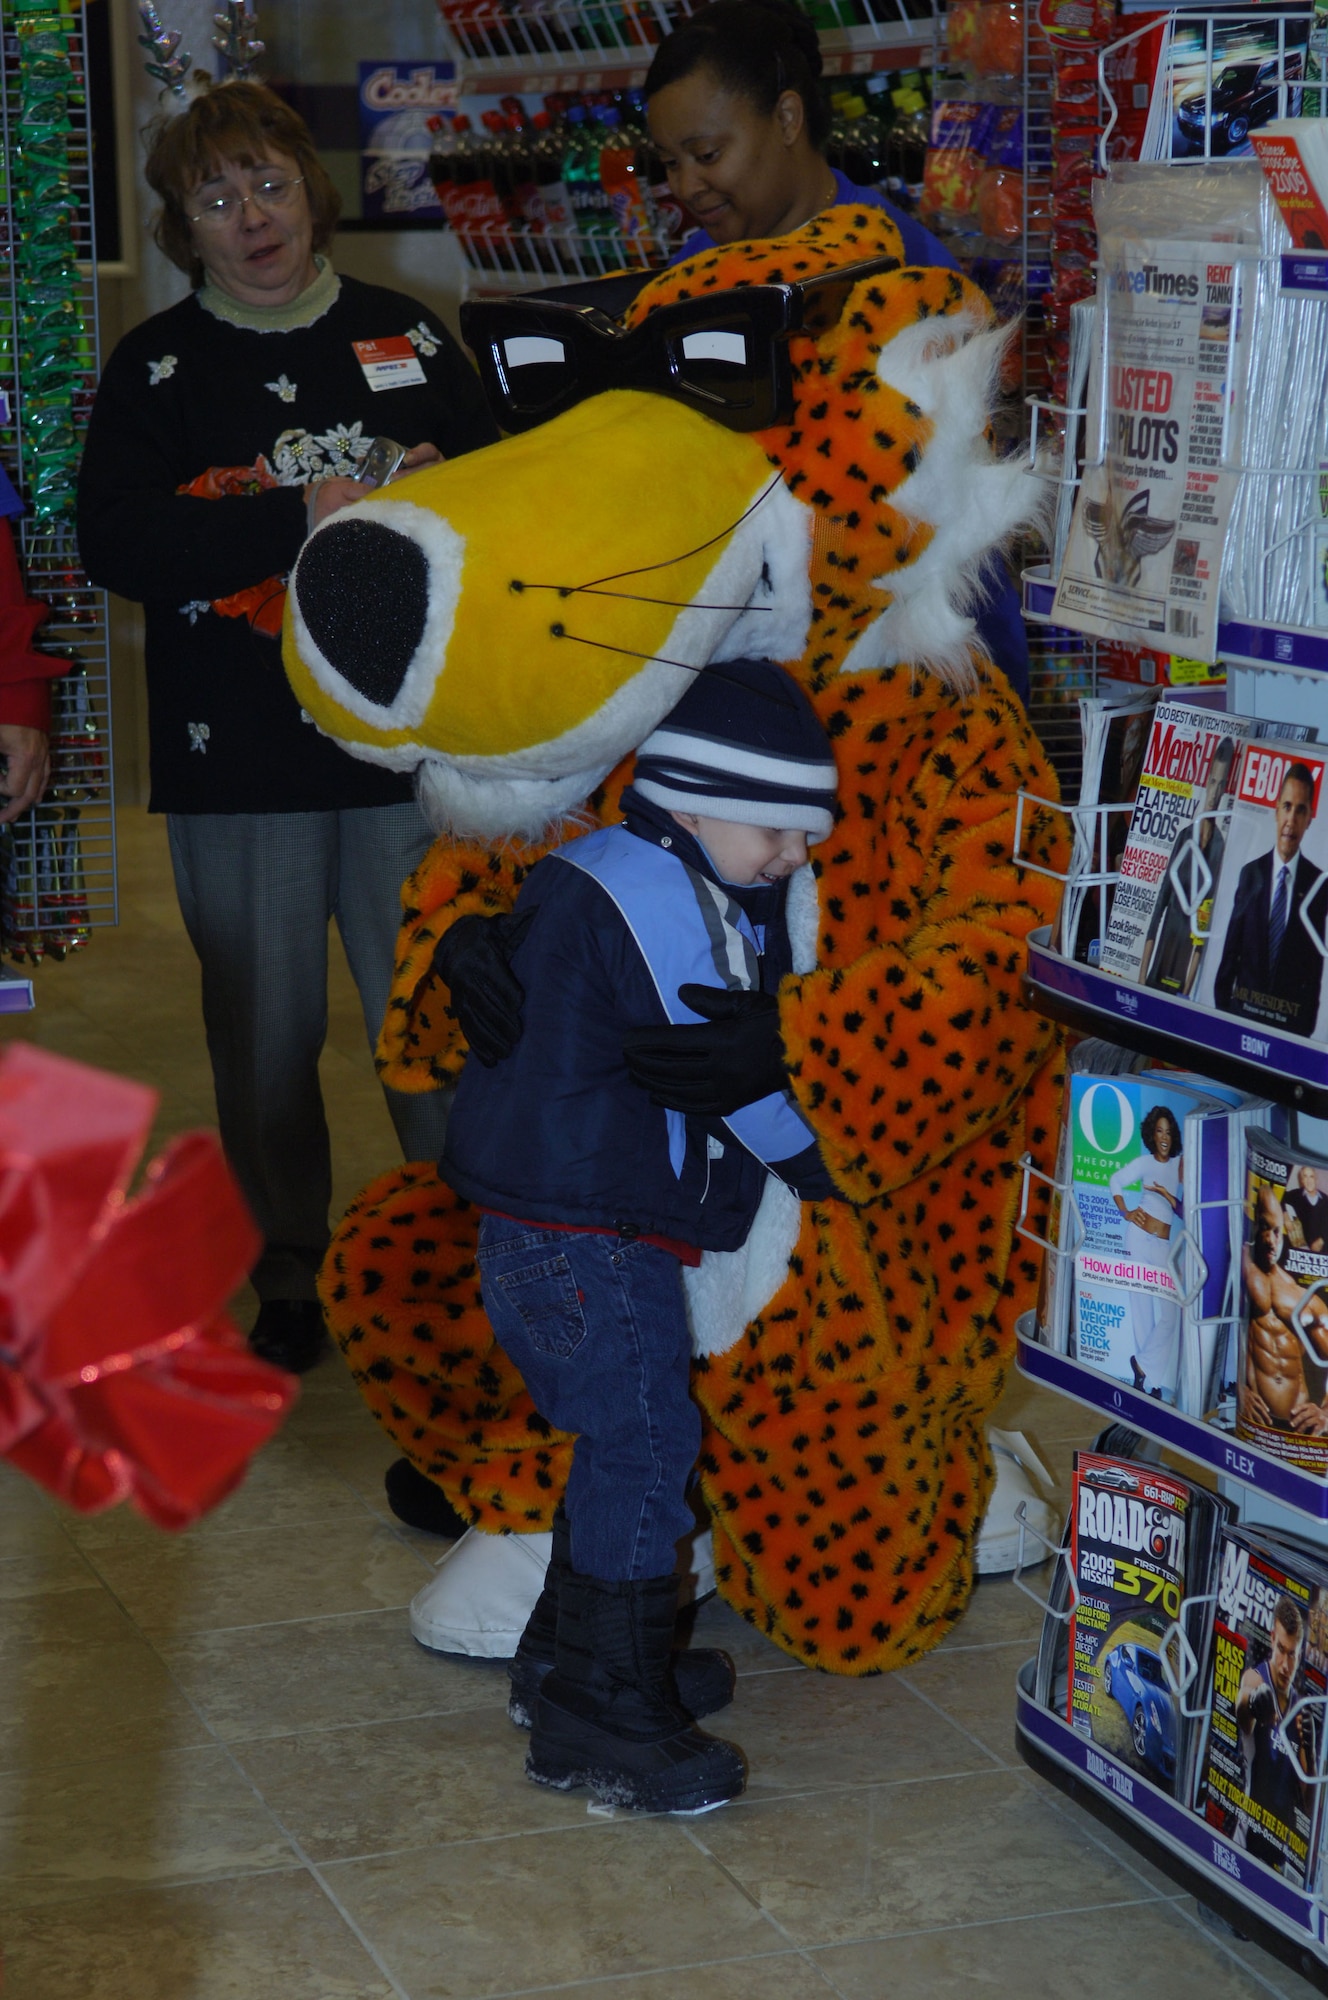 MINOT AIR FORCE BASE, N.D. -- Toby Wools, son of Tech. Sgt. Dusty Wools, 5th Maintenance Squadron, hugs Chester Cheetah at the grand opening of the new base shoppette here Dec. 19. The new, state-of-the-art $17 million facility is more than 19, 000 square feet and includes 24-hour operation, a replacement of the existing Army and Air Force Exchange Service service station and an AAFES-operated car wash. (U.S. Air Force photo by Senior Airman Cassandra Jones)